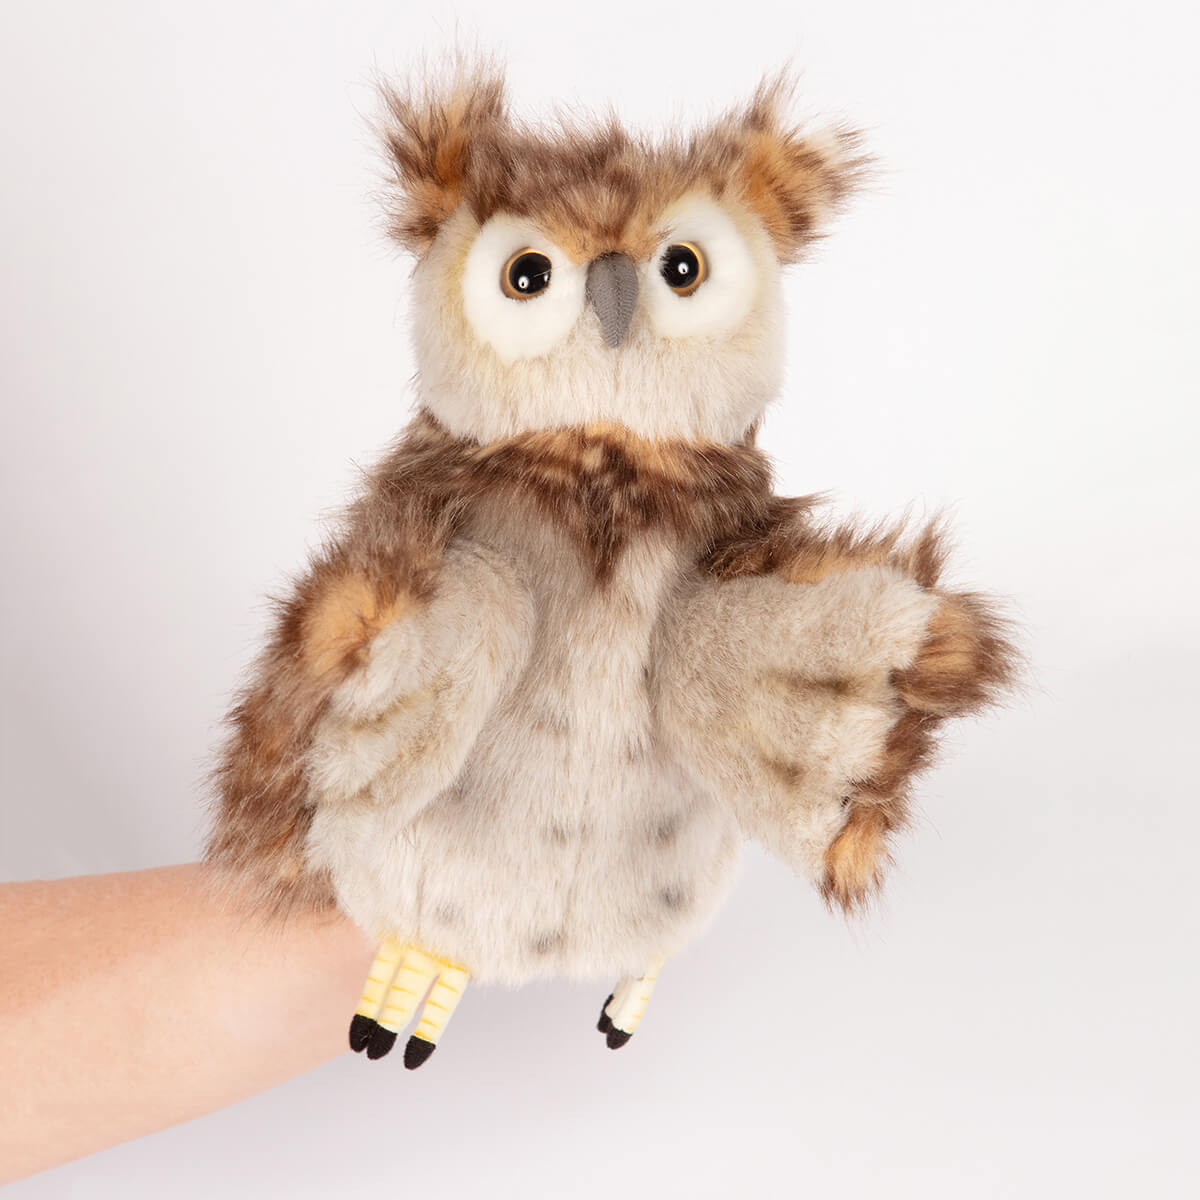 Buy Hand Puppets Puppets Online, Toys & Games, For Sale South Africa